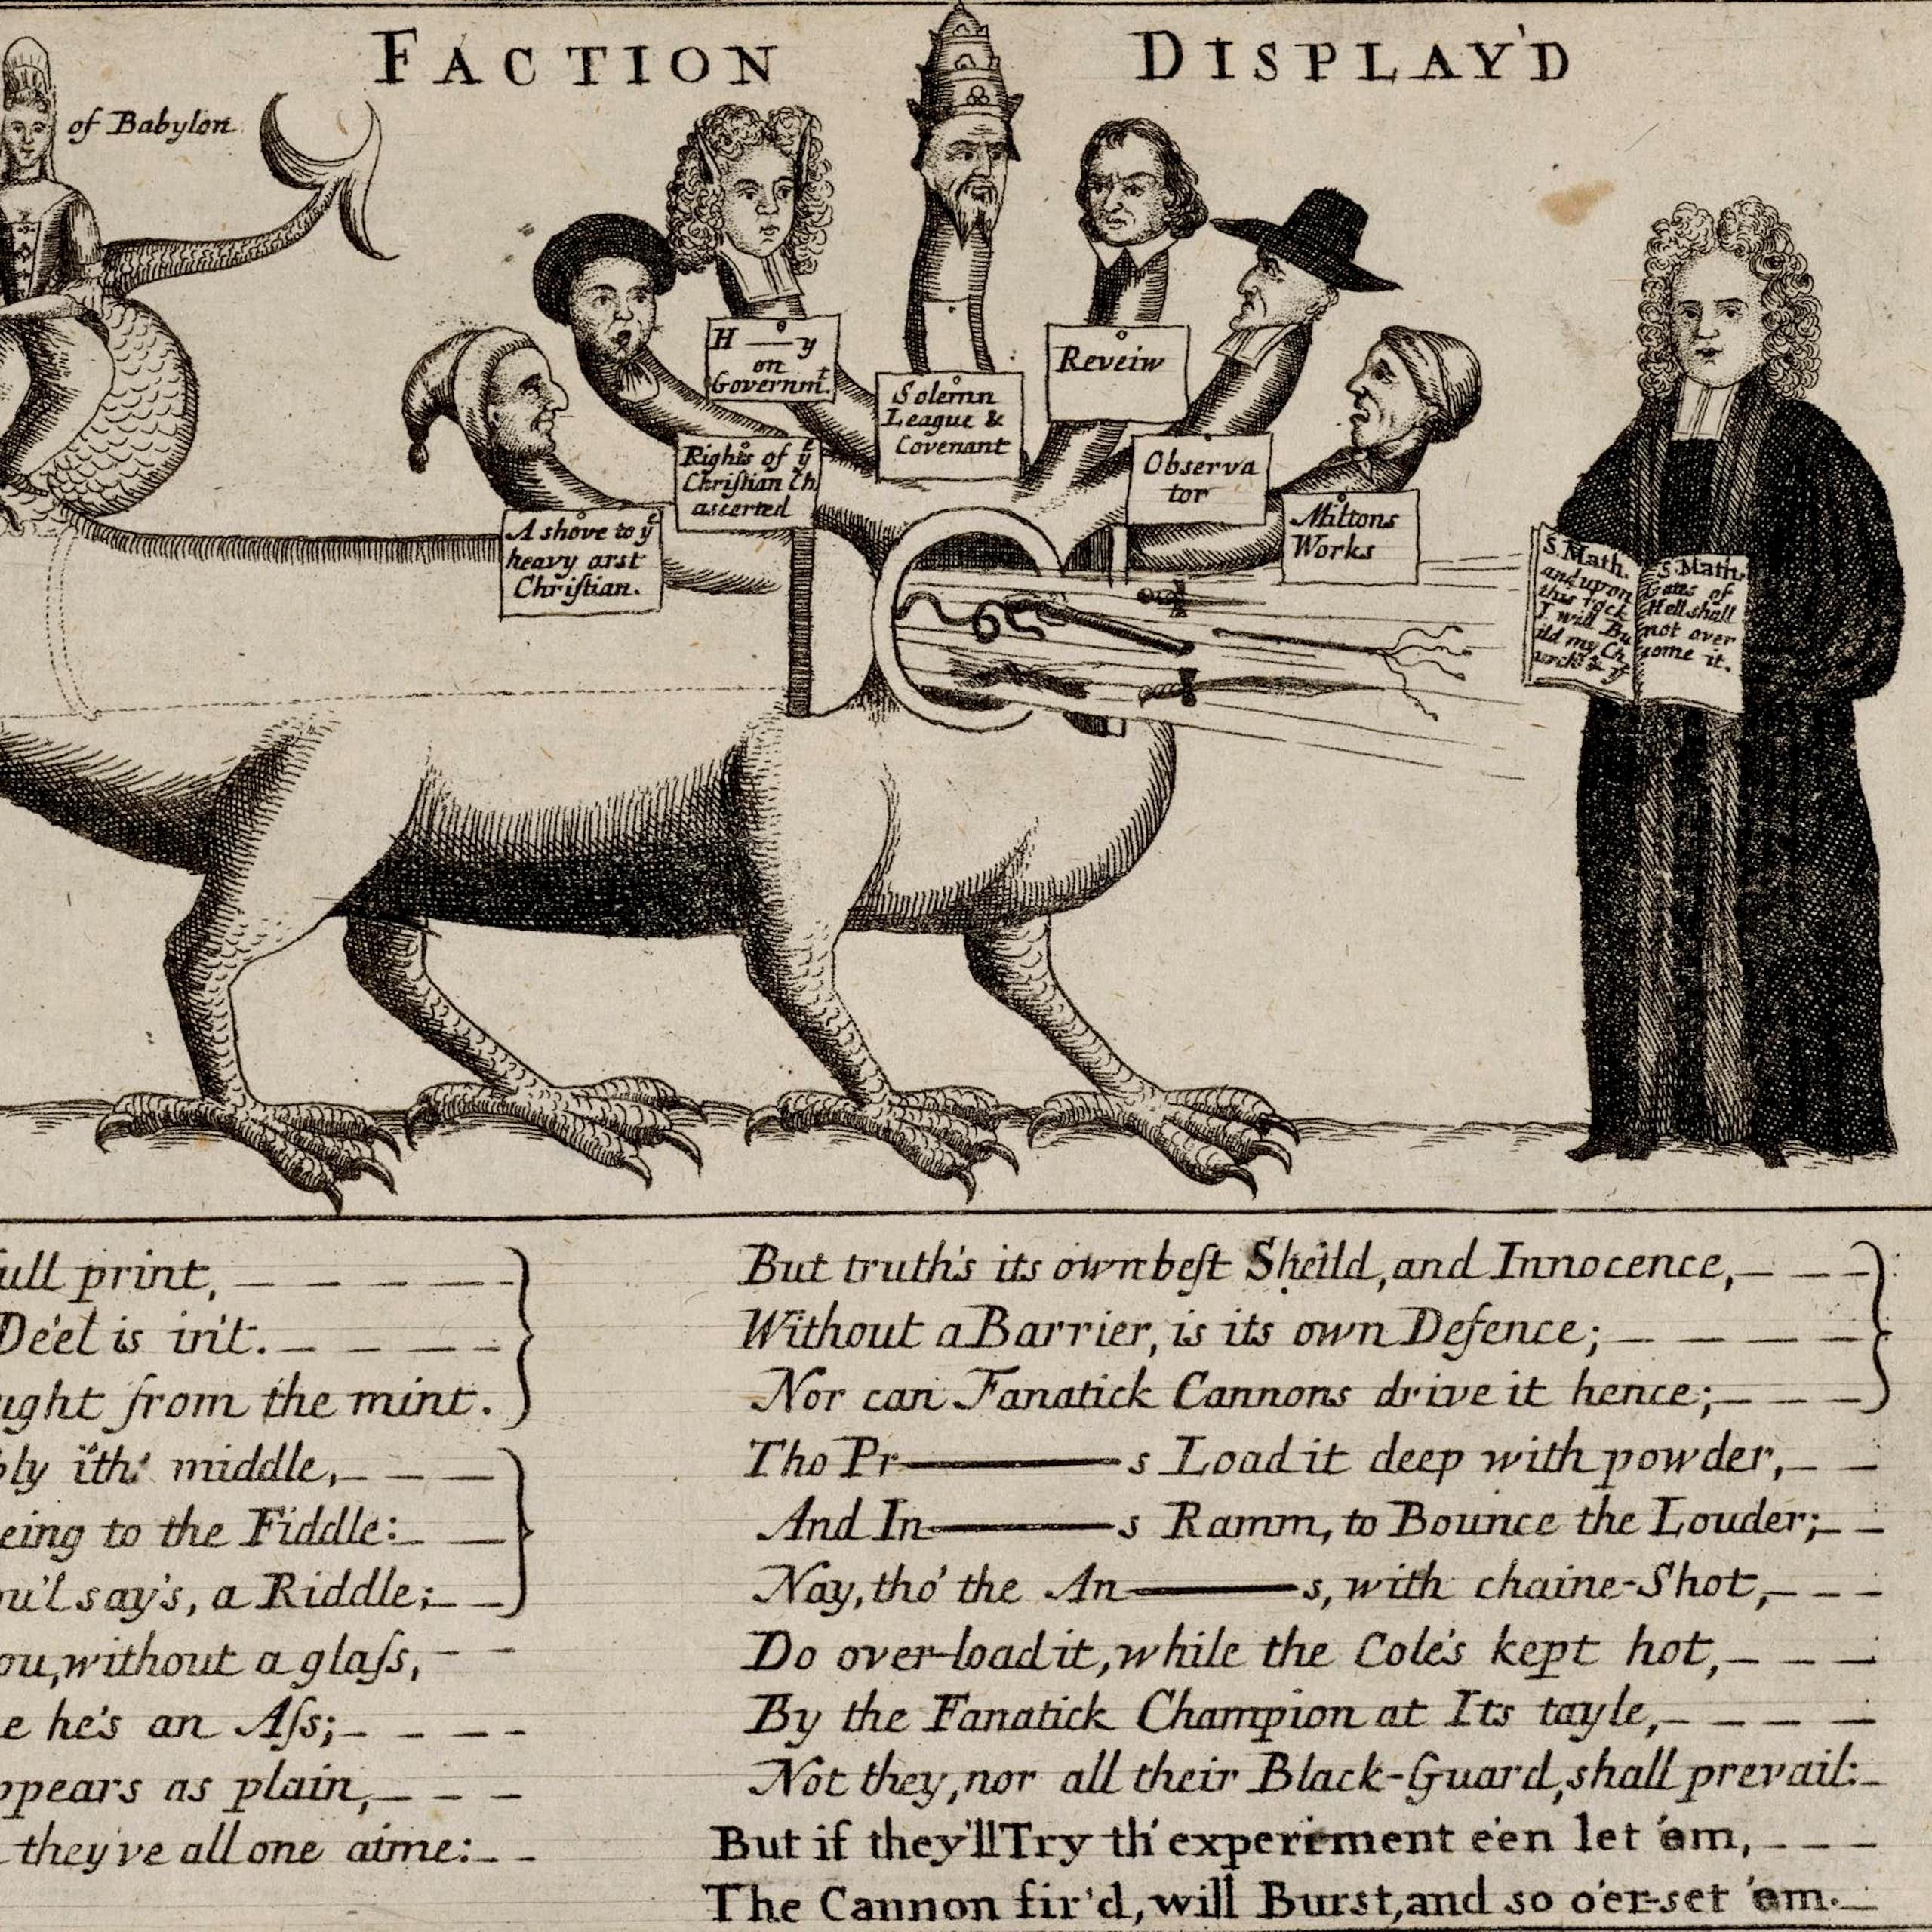 A satirical drawing from the 18th century.